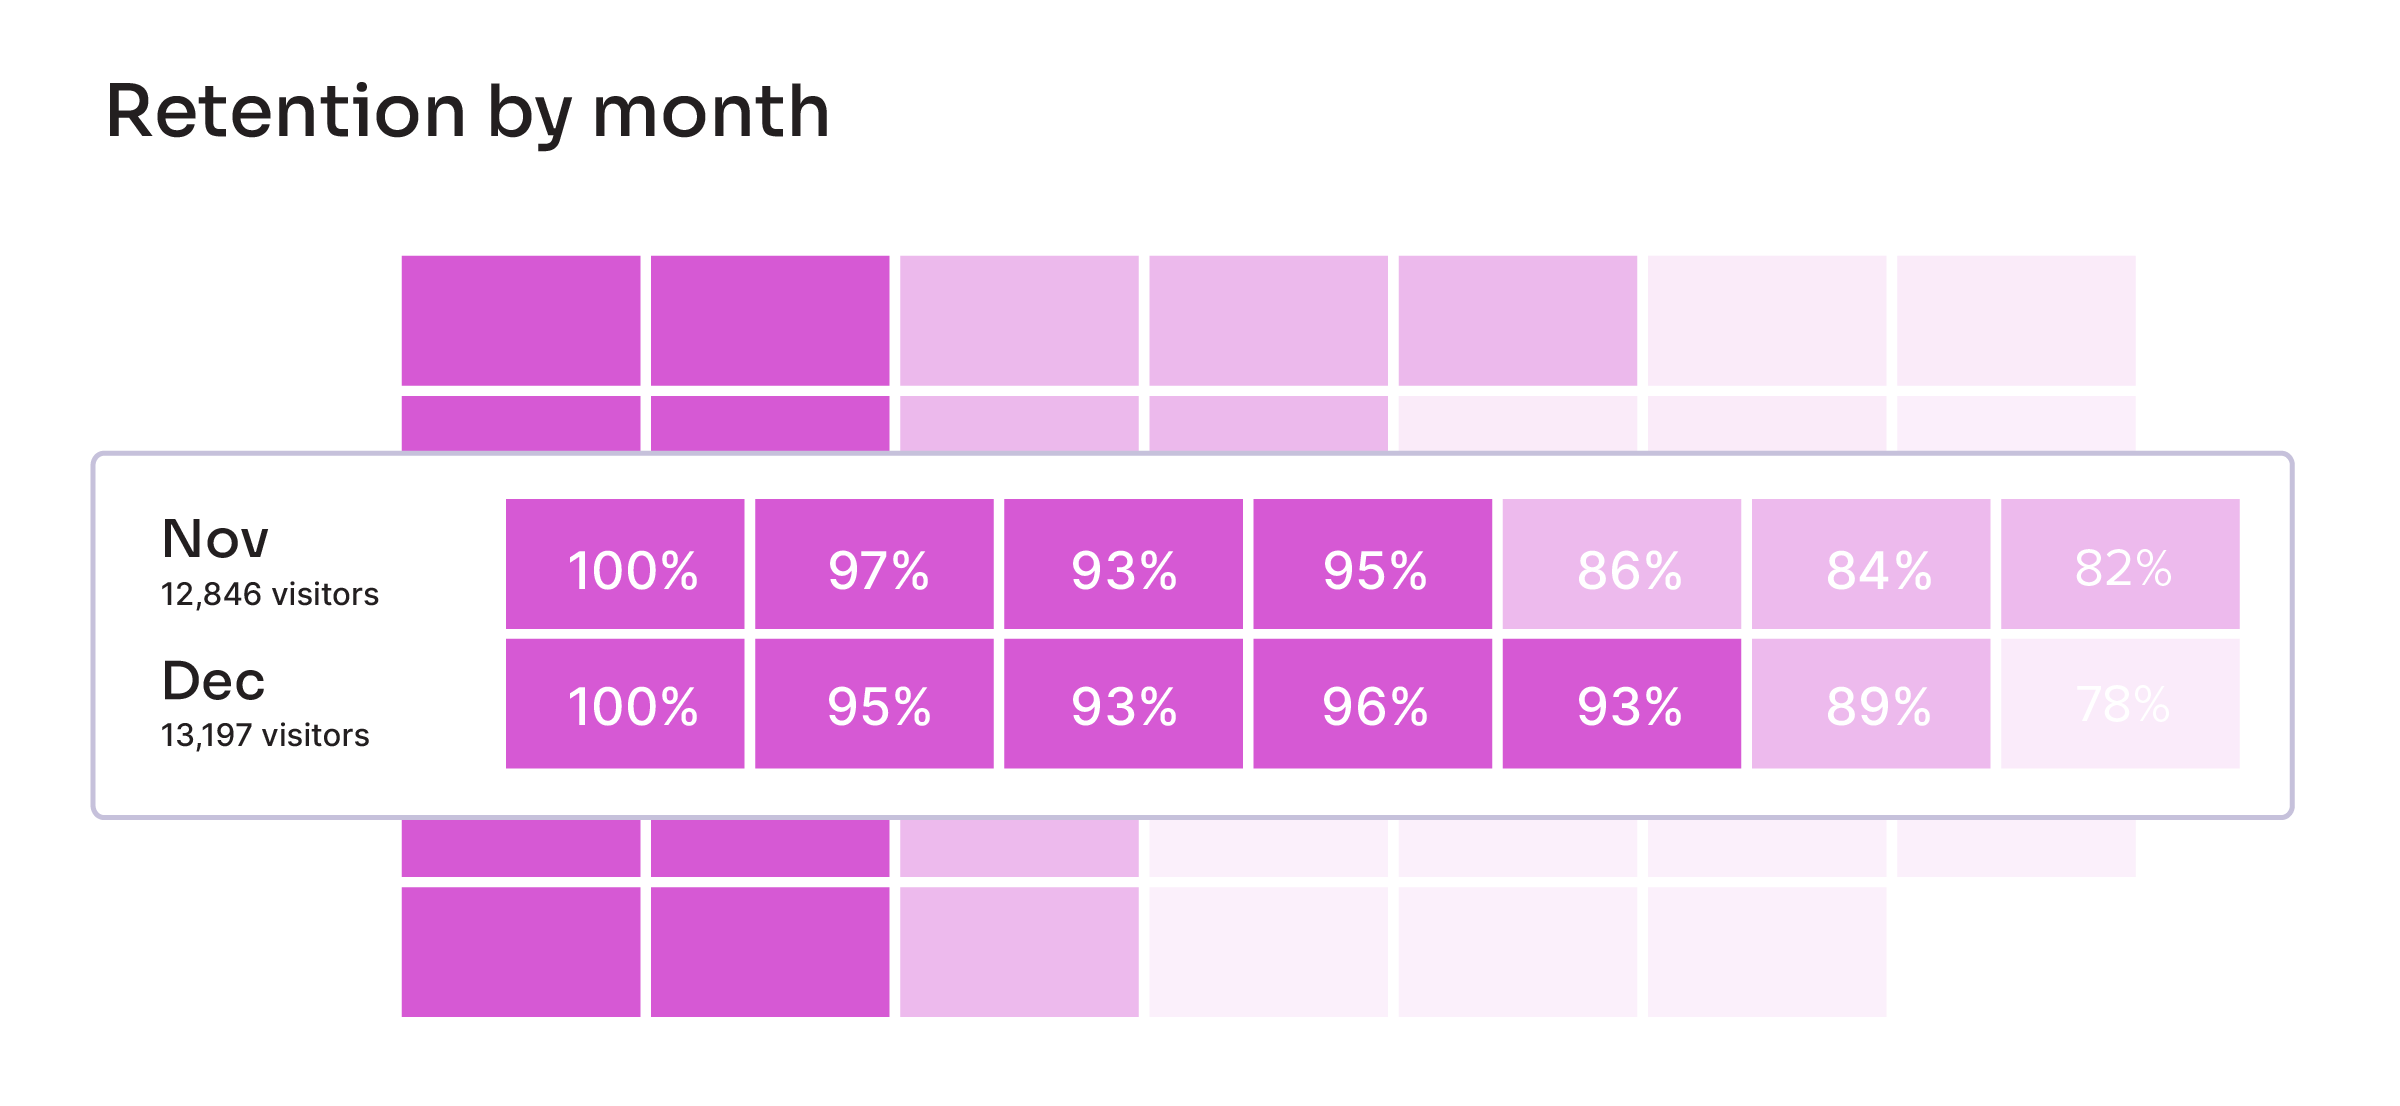 Retention by month